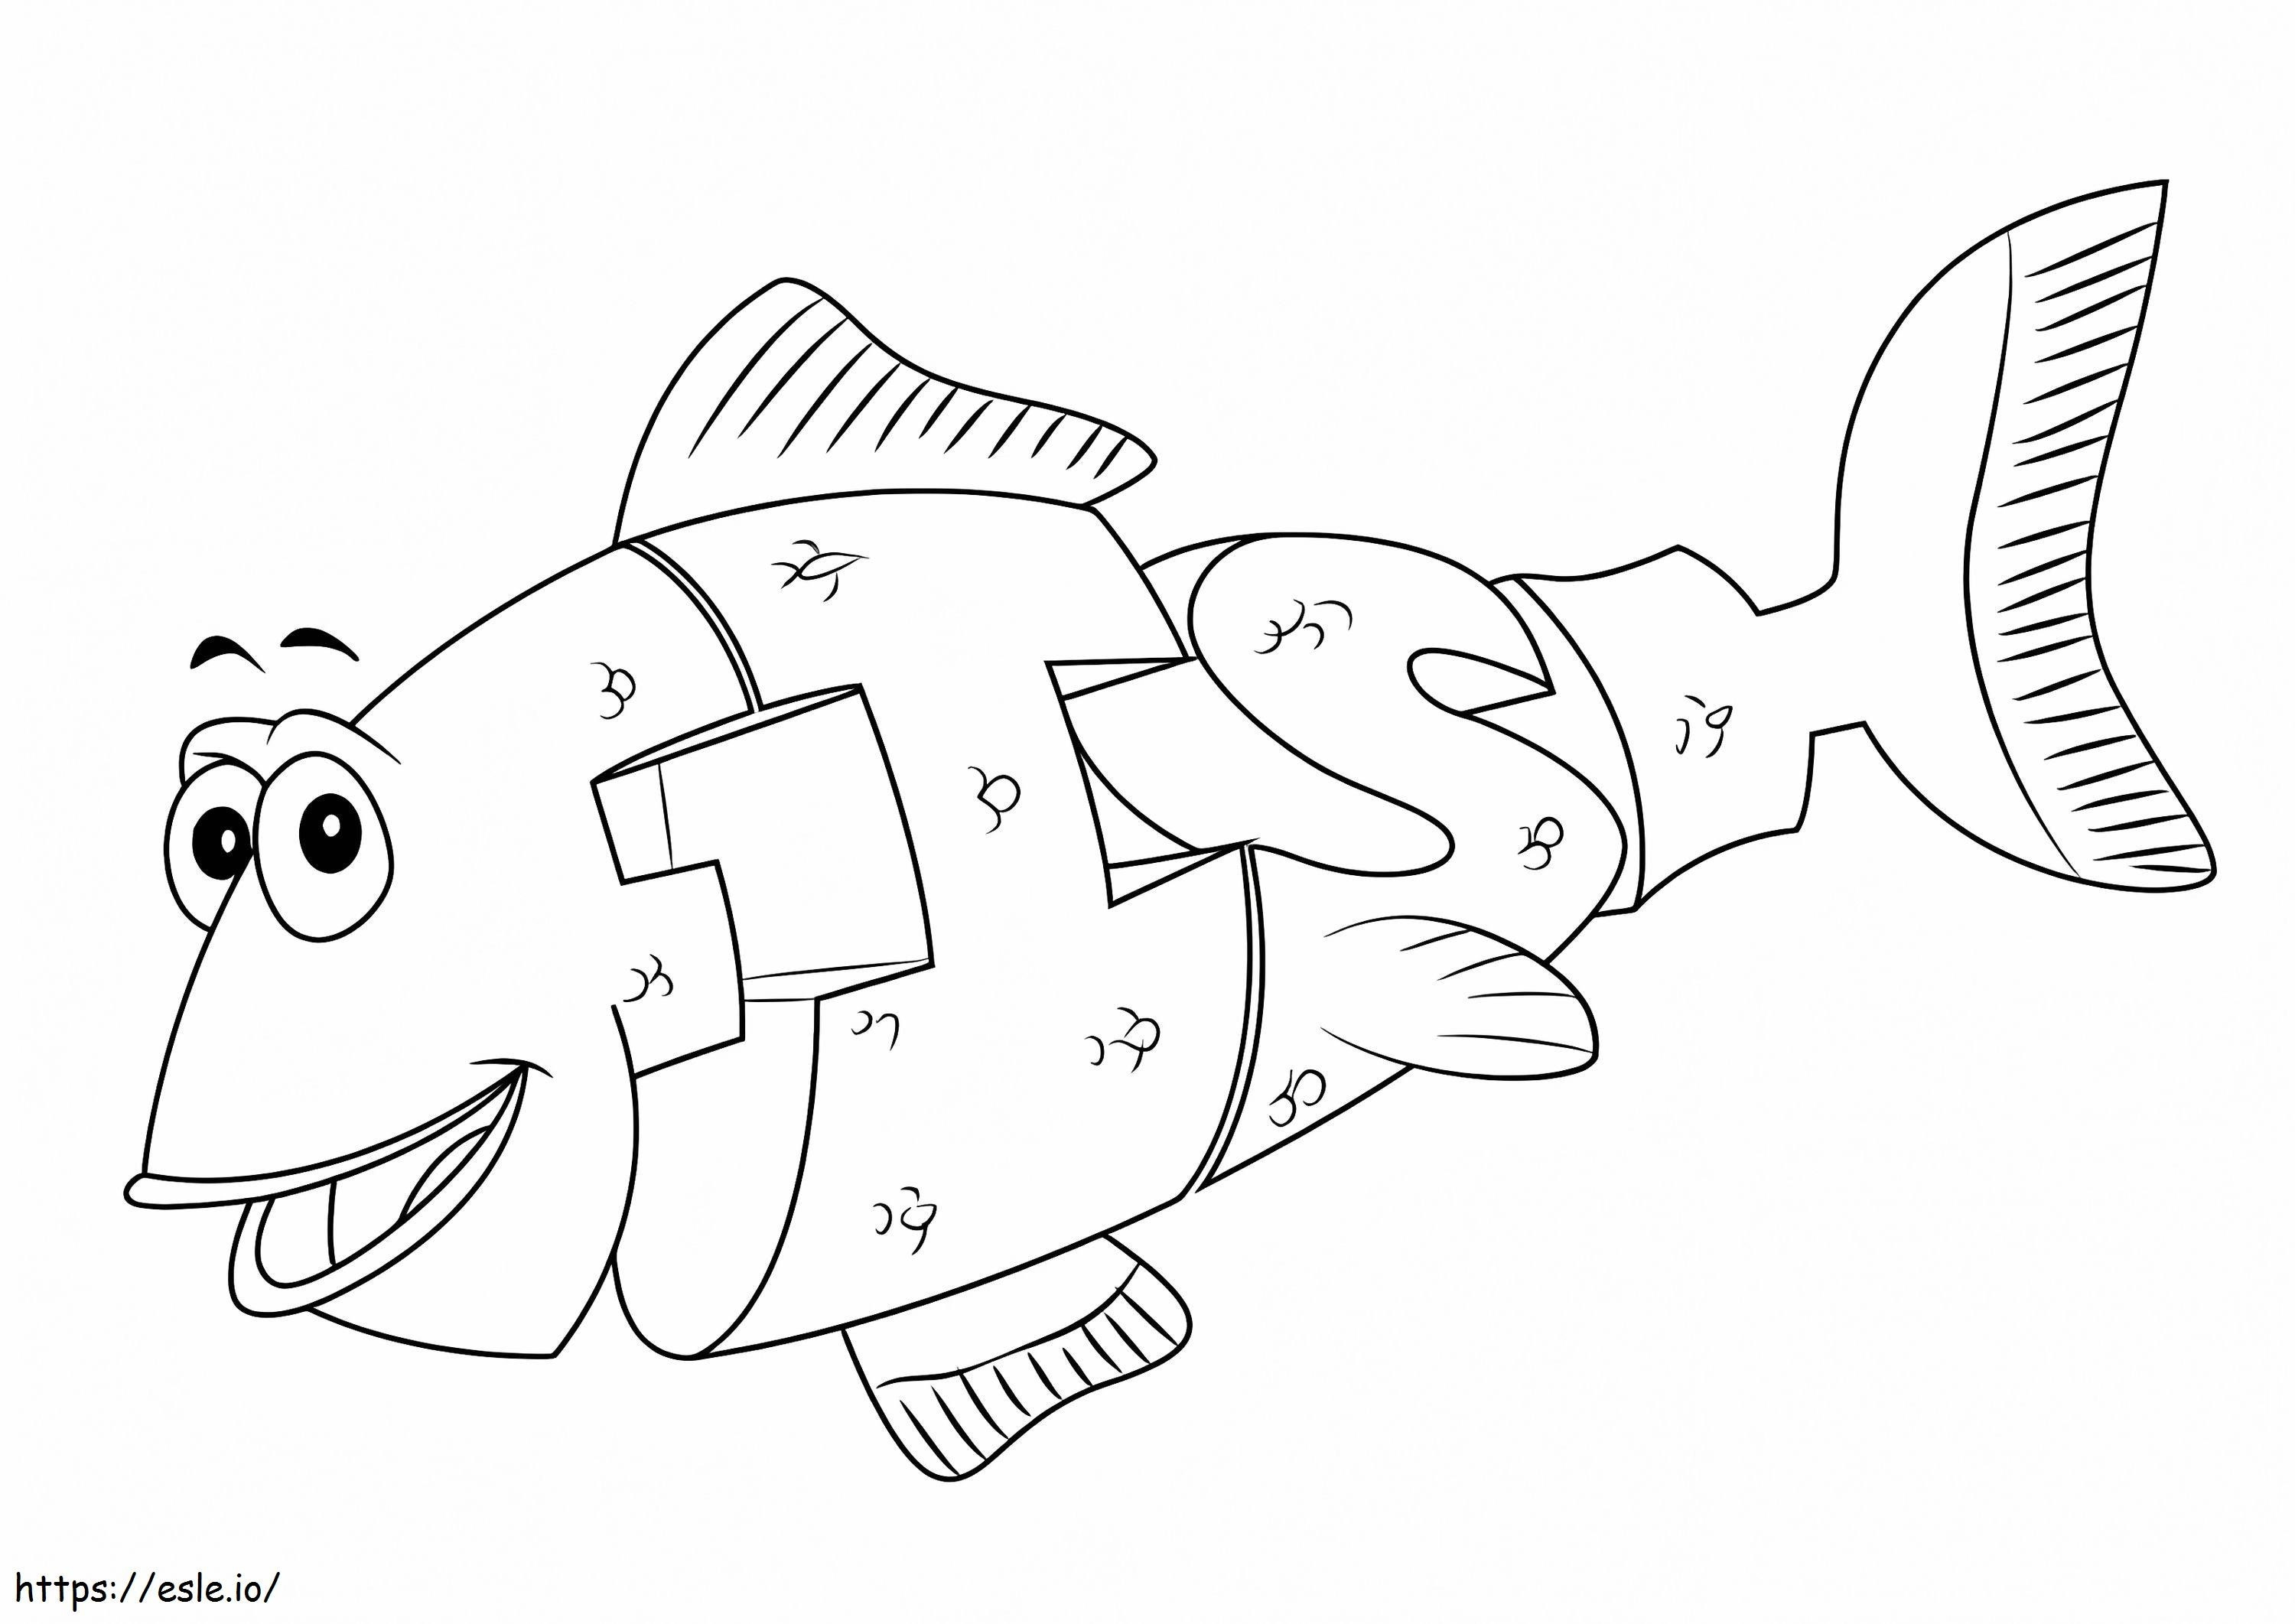 WordWold Fish coloring page